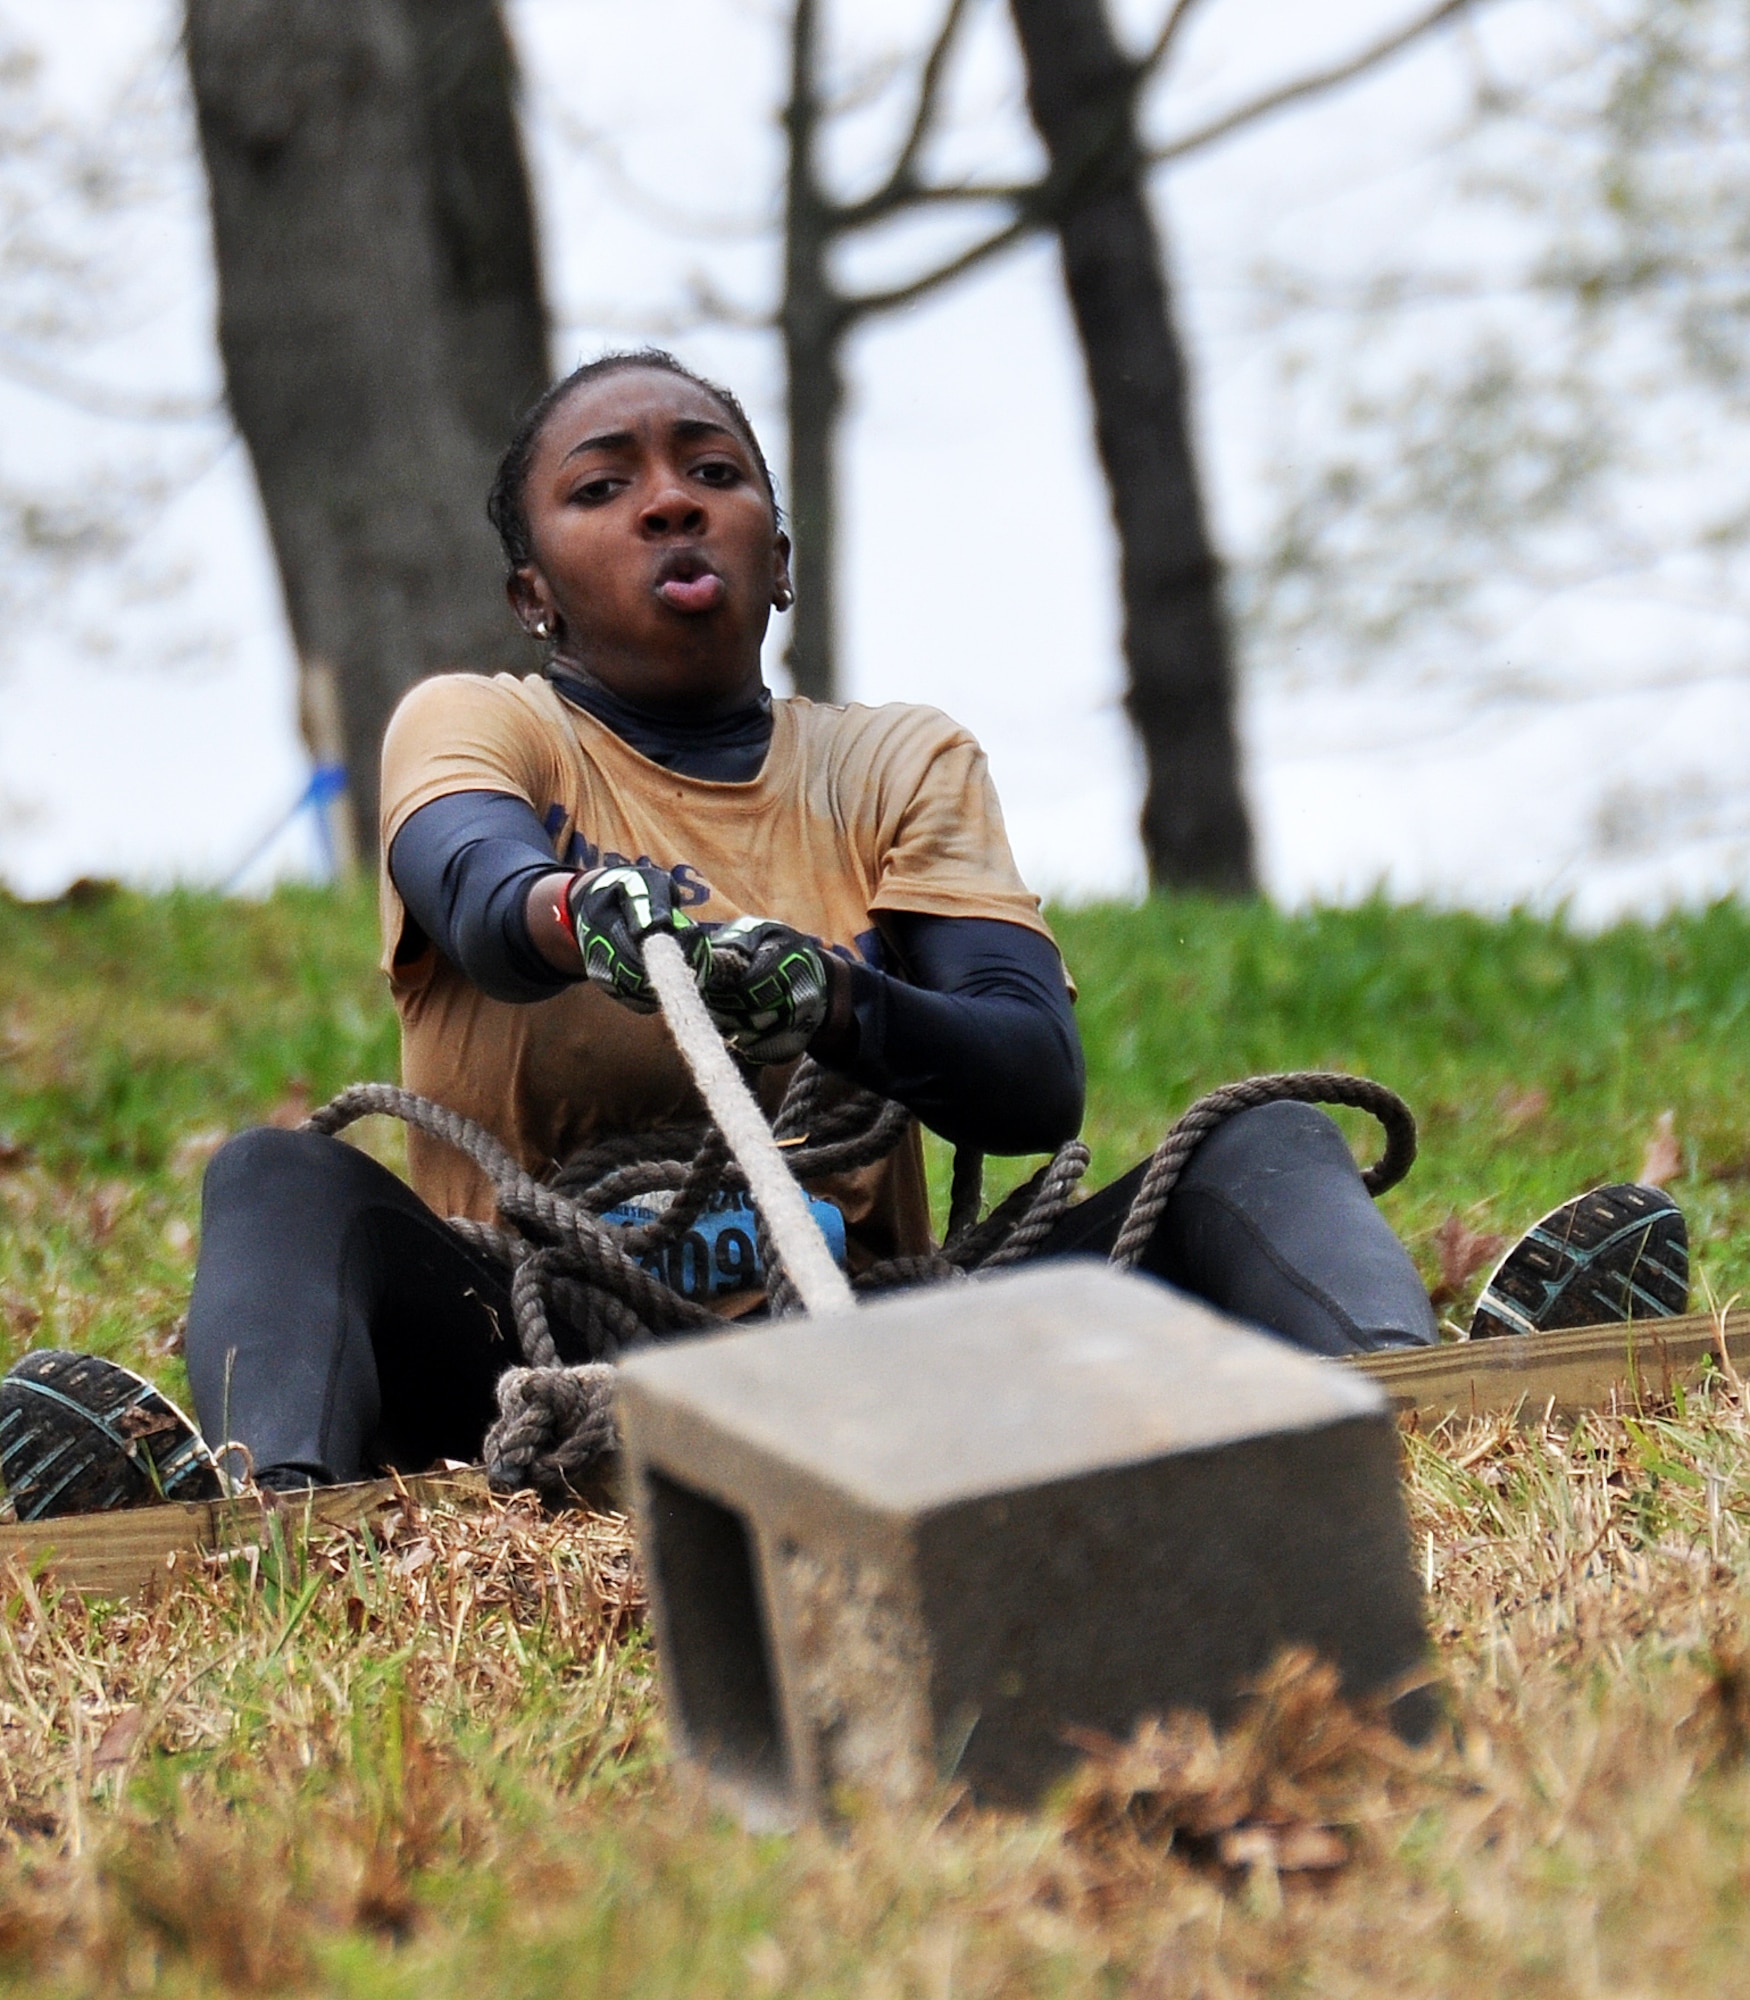 Erica Jones, daughter of Senior Master Sgt. Eric Jones, 94th Logistics Readiness Squadron, pulls a masonry brick up a hill during the Georgia Spring 2015 Savage Race in Dallas, Ga., April 18, 2015. The Savage Race is an Air Force Reserve sponsored obstacle course that challenges participants in more than 20 different trials over the course of five miles. (U.S. Air Force photo/Senior Airman Daniel Phelps)